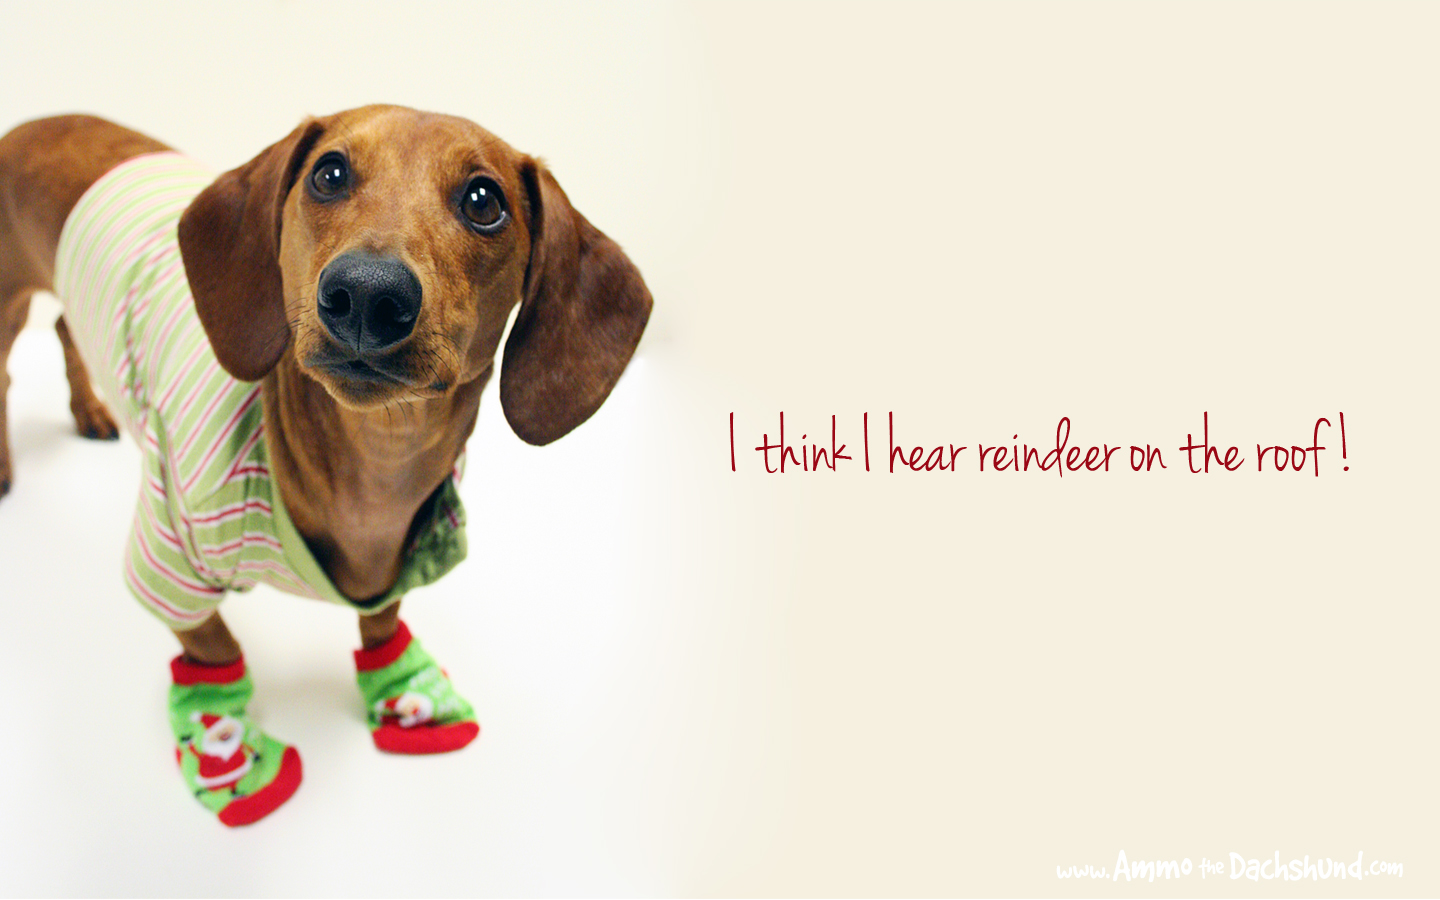 Days of Cheer! Free Holiday Desktop Wallpaper. Ammo the Dachshund